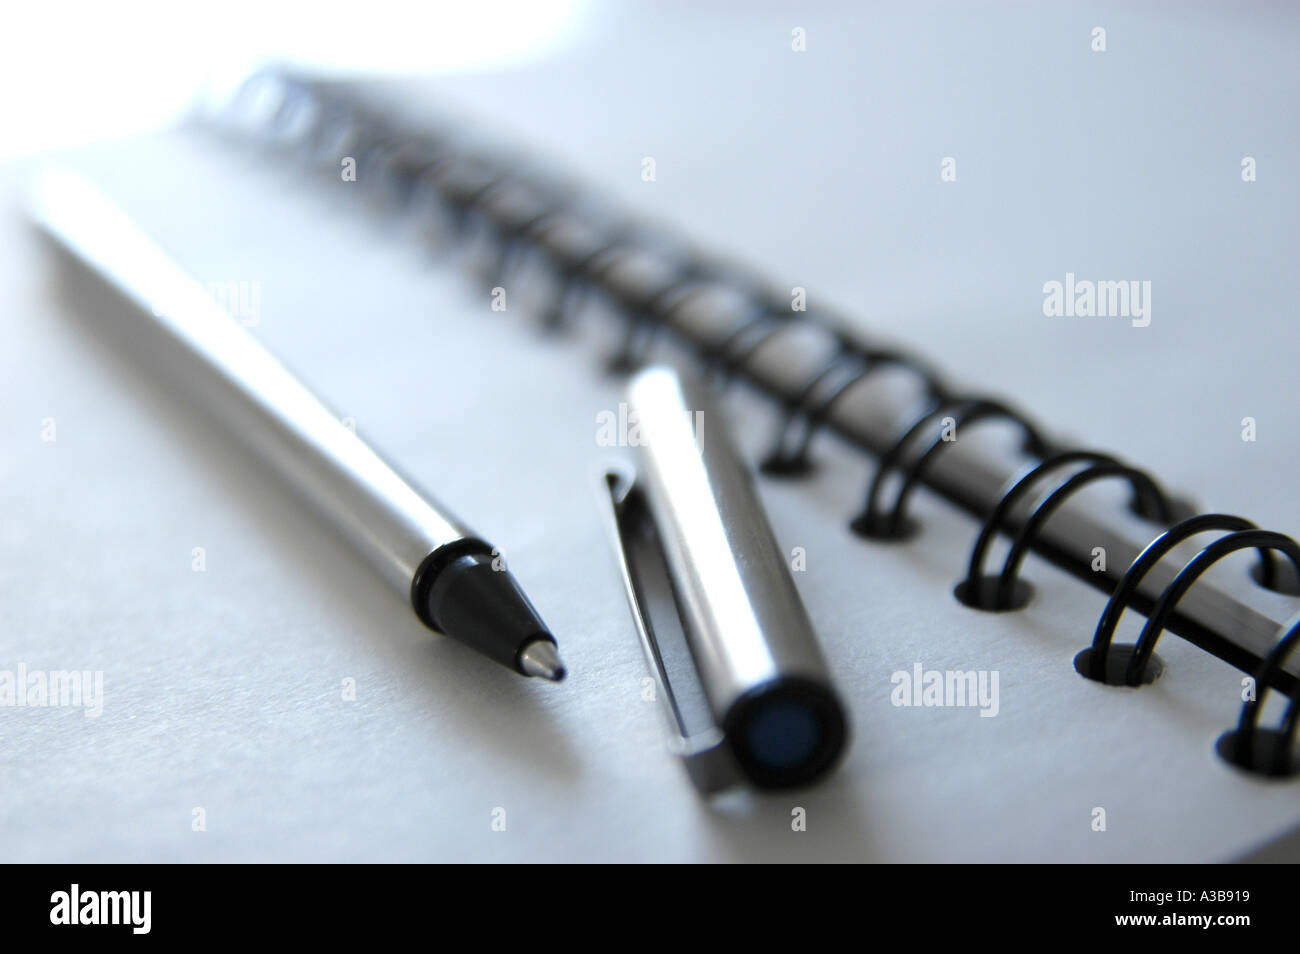 White note book with black spiral binding and stainless steel pen with cap removed. Shot with shallow depth-of-field. Stock Photo